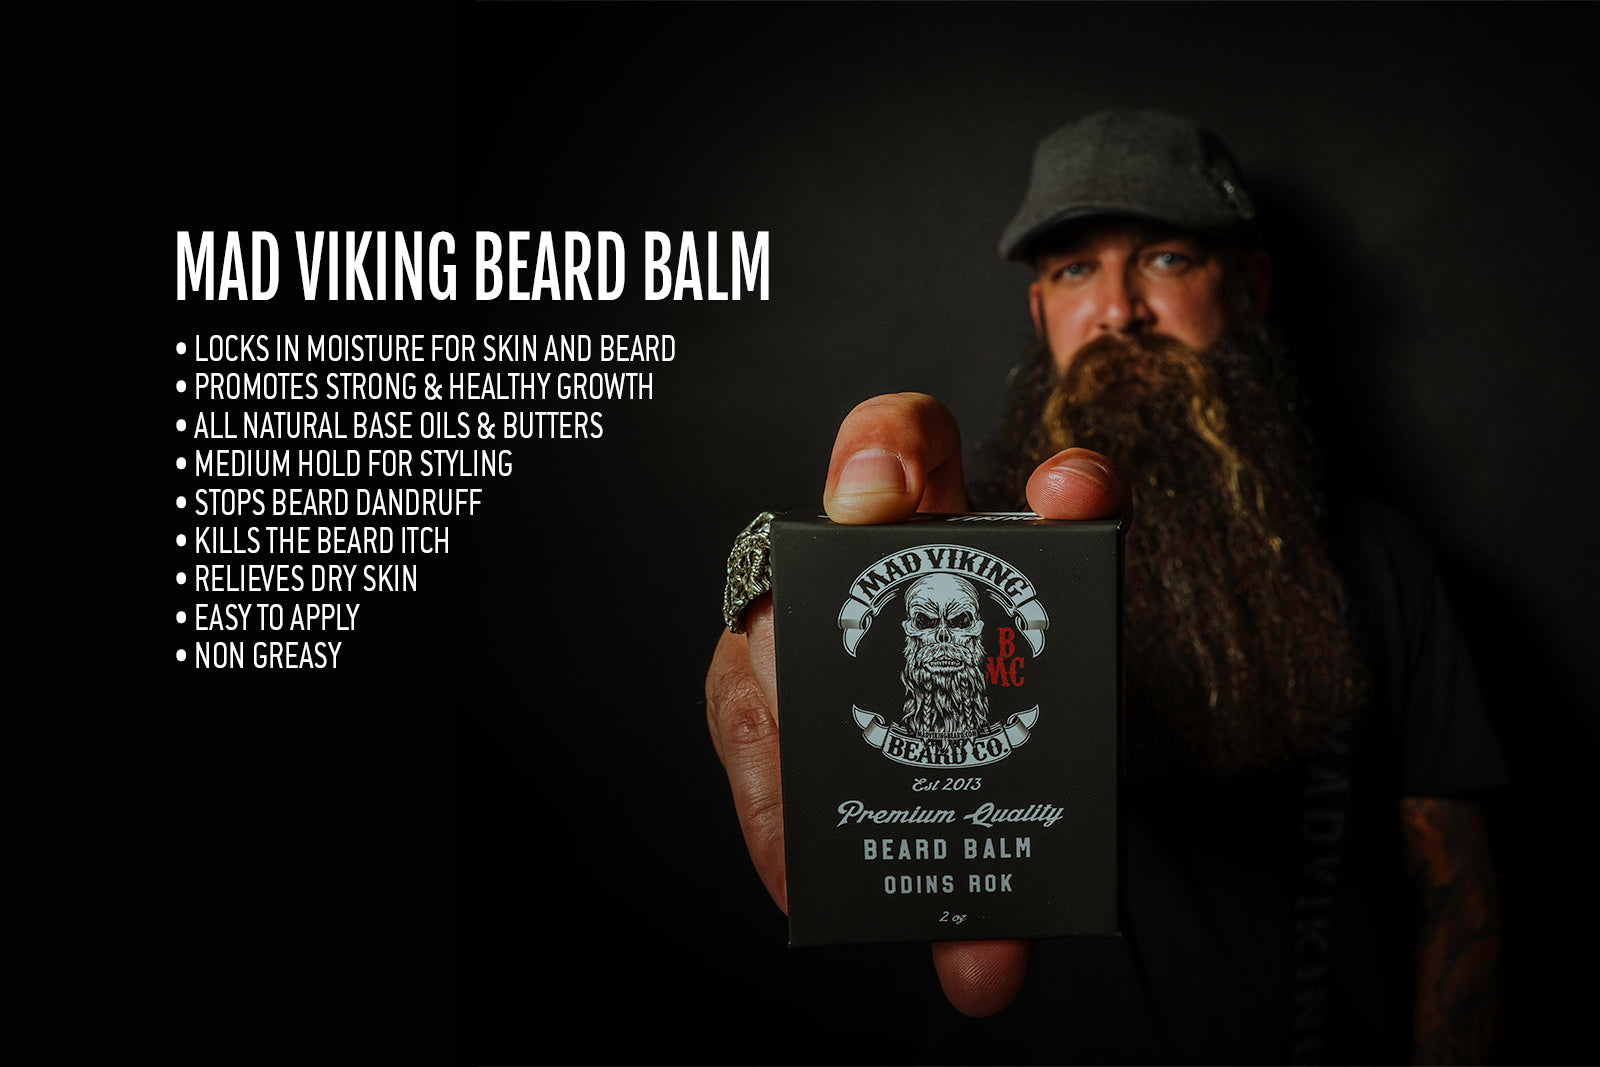 What are the benefits of using balm for beards?